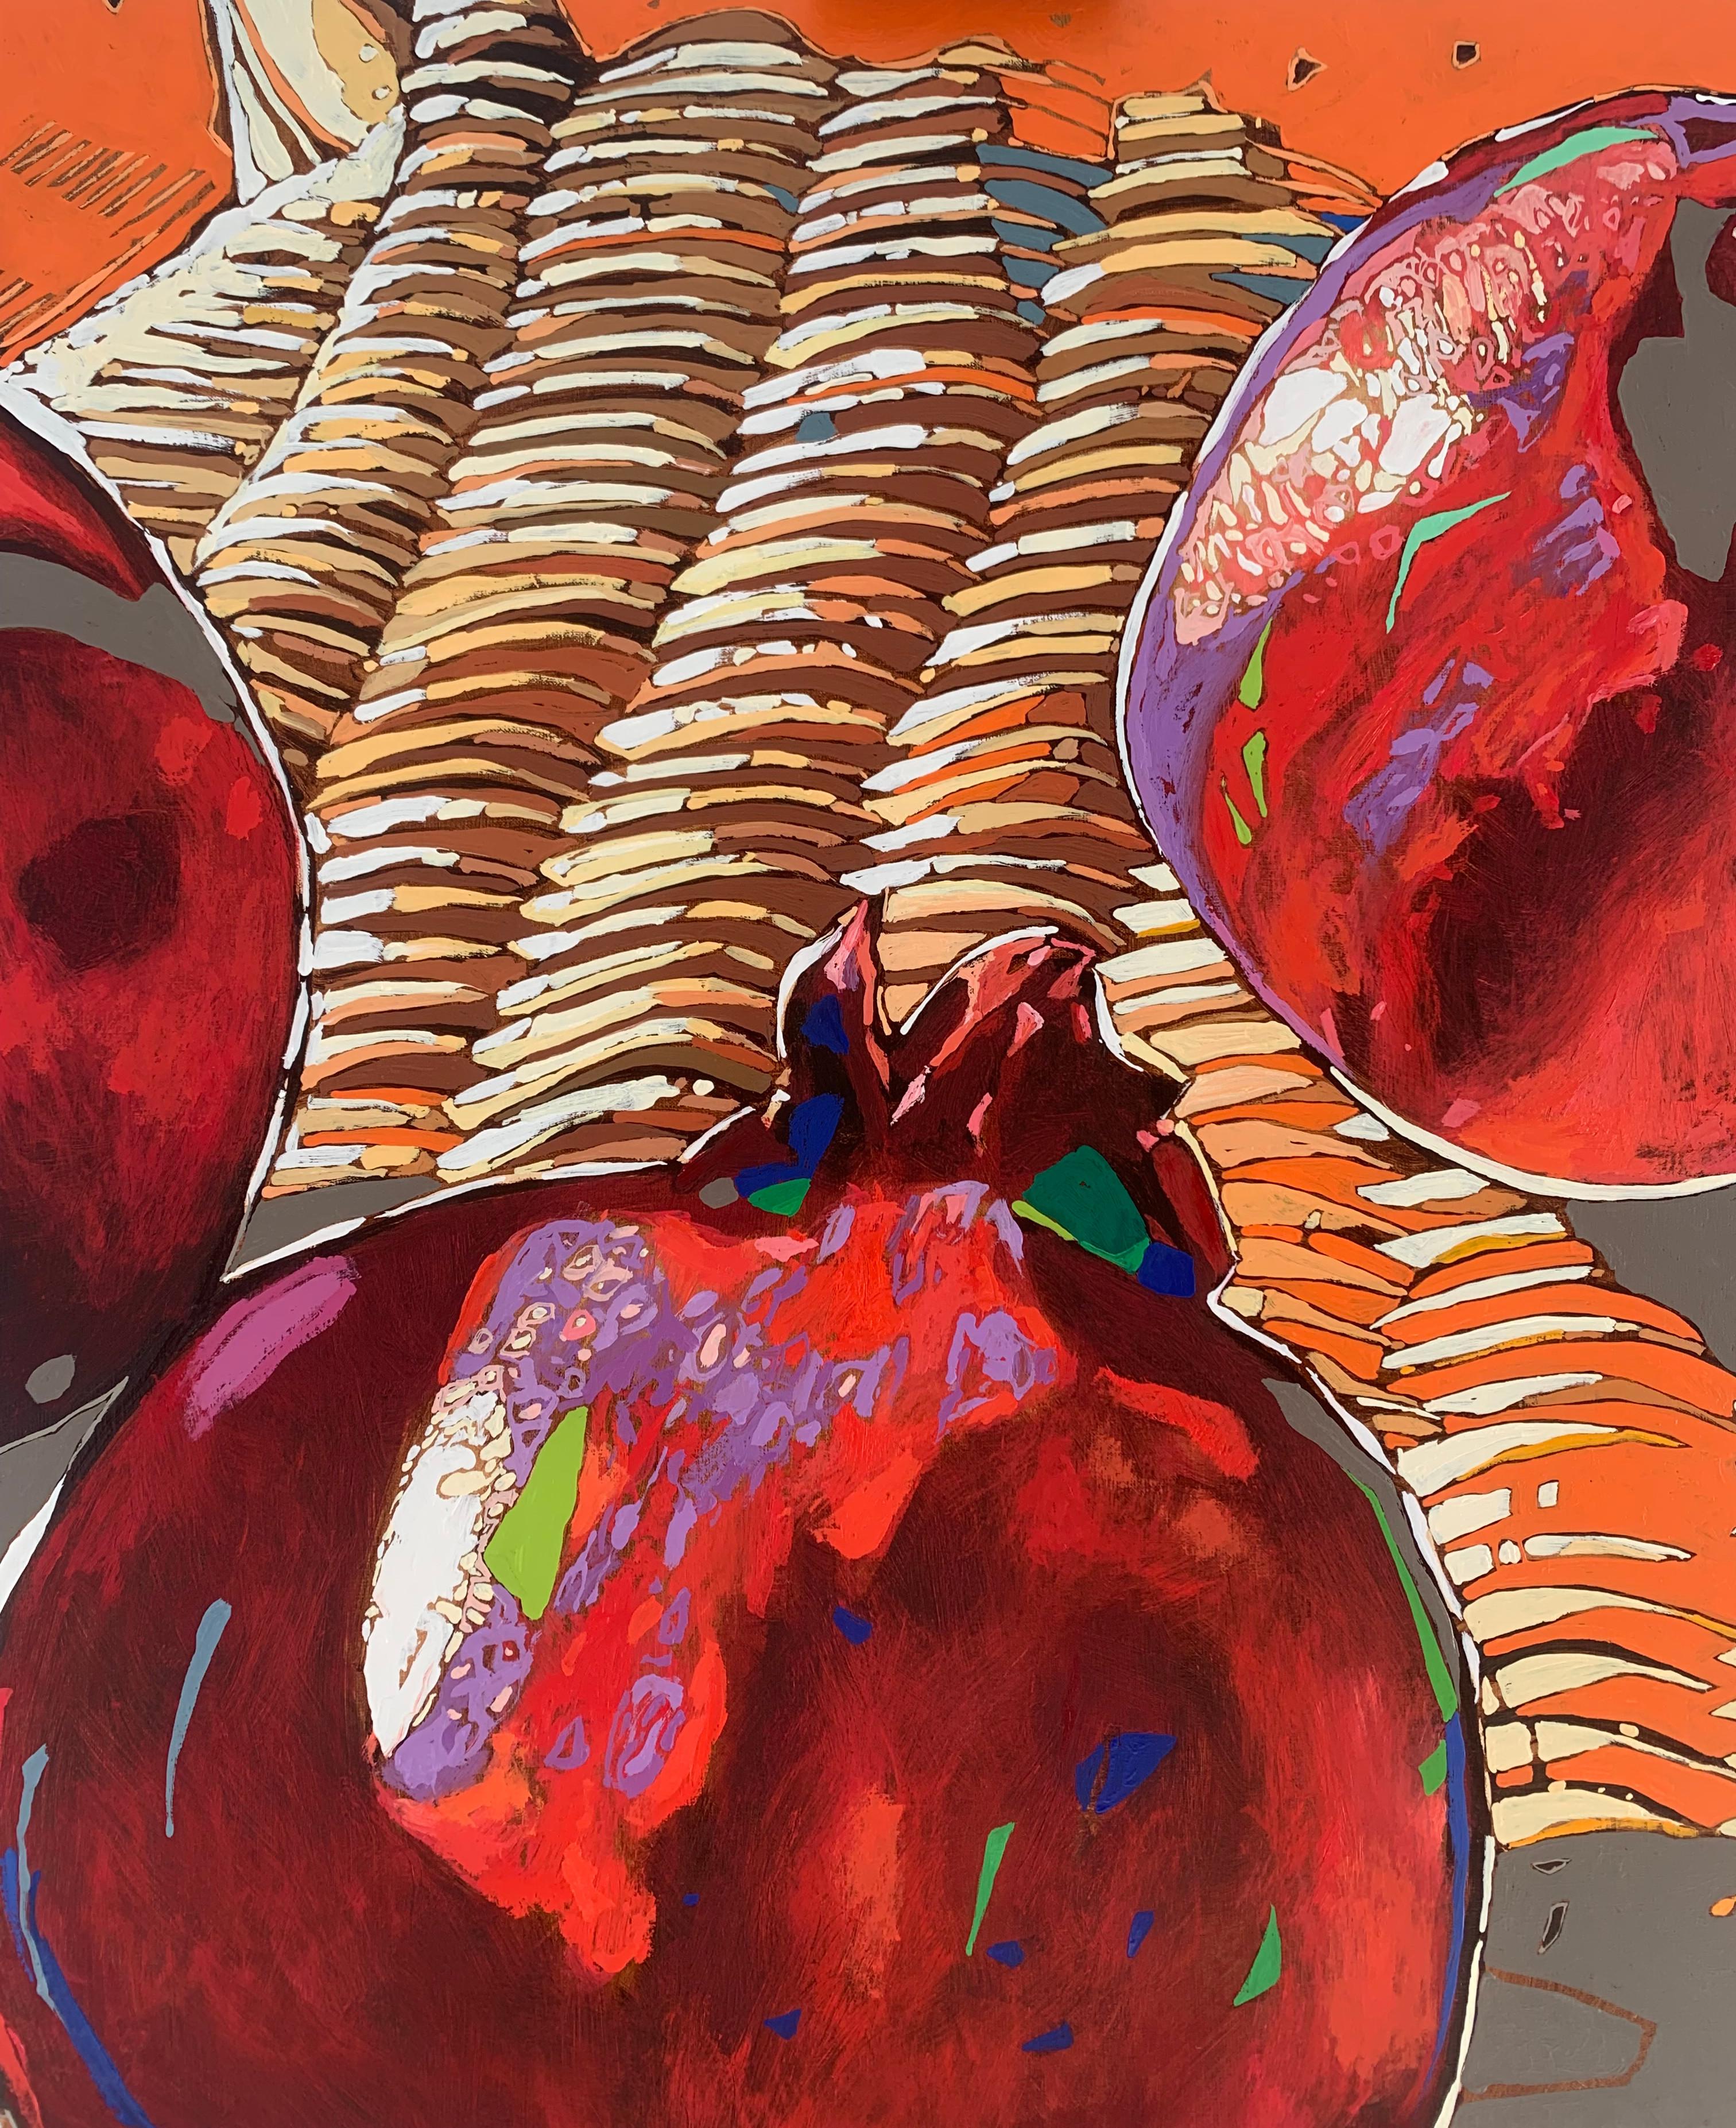 Contemporary figurative oil on canvas painting by Polish artist Rafal Gadowski. Painting in pop art style depicting three pomegranates. Painting is bright with many dynamic shapes. Title of this painting is 'Pomegranates 10' and it is a part of